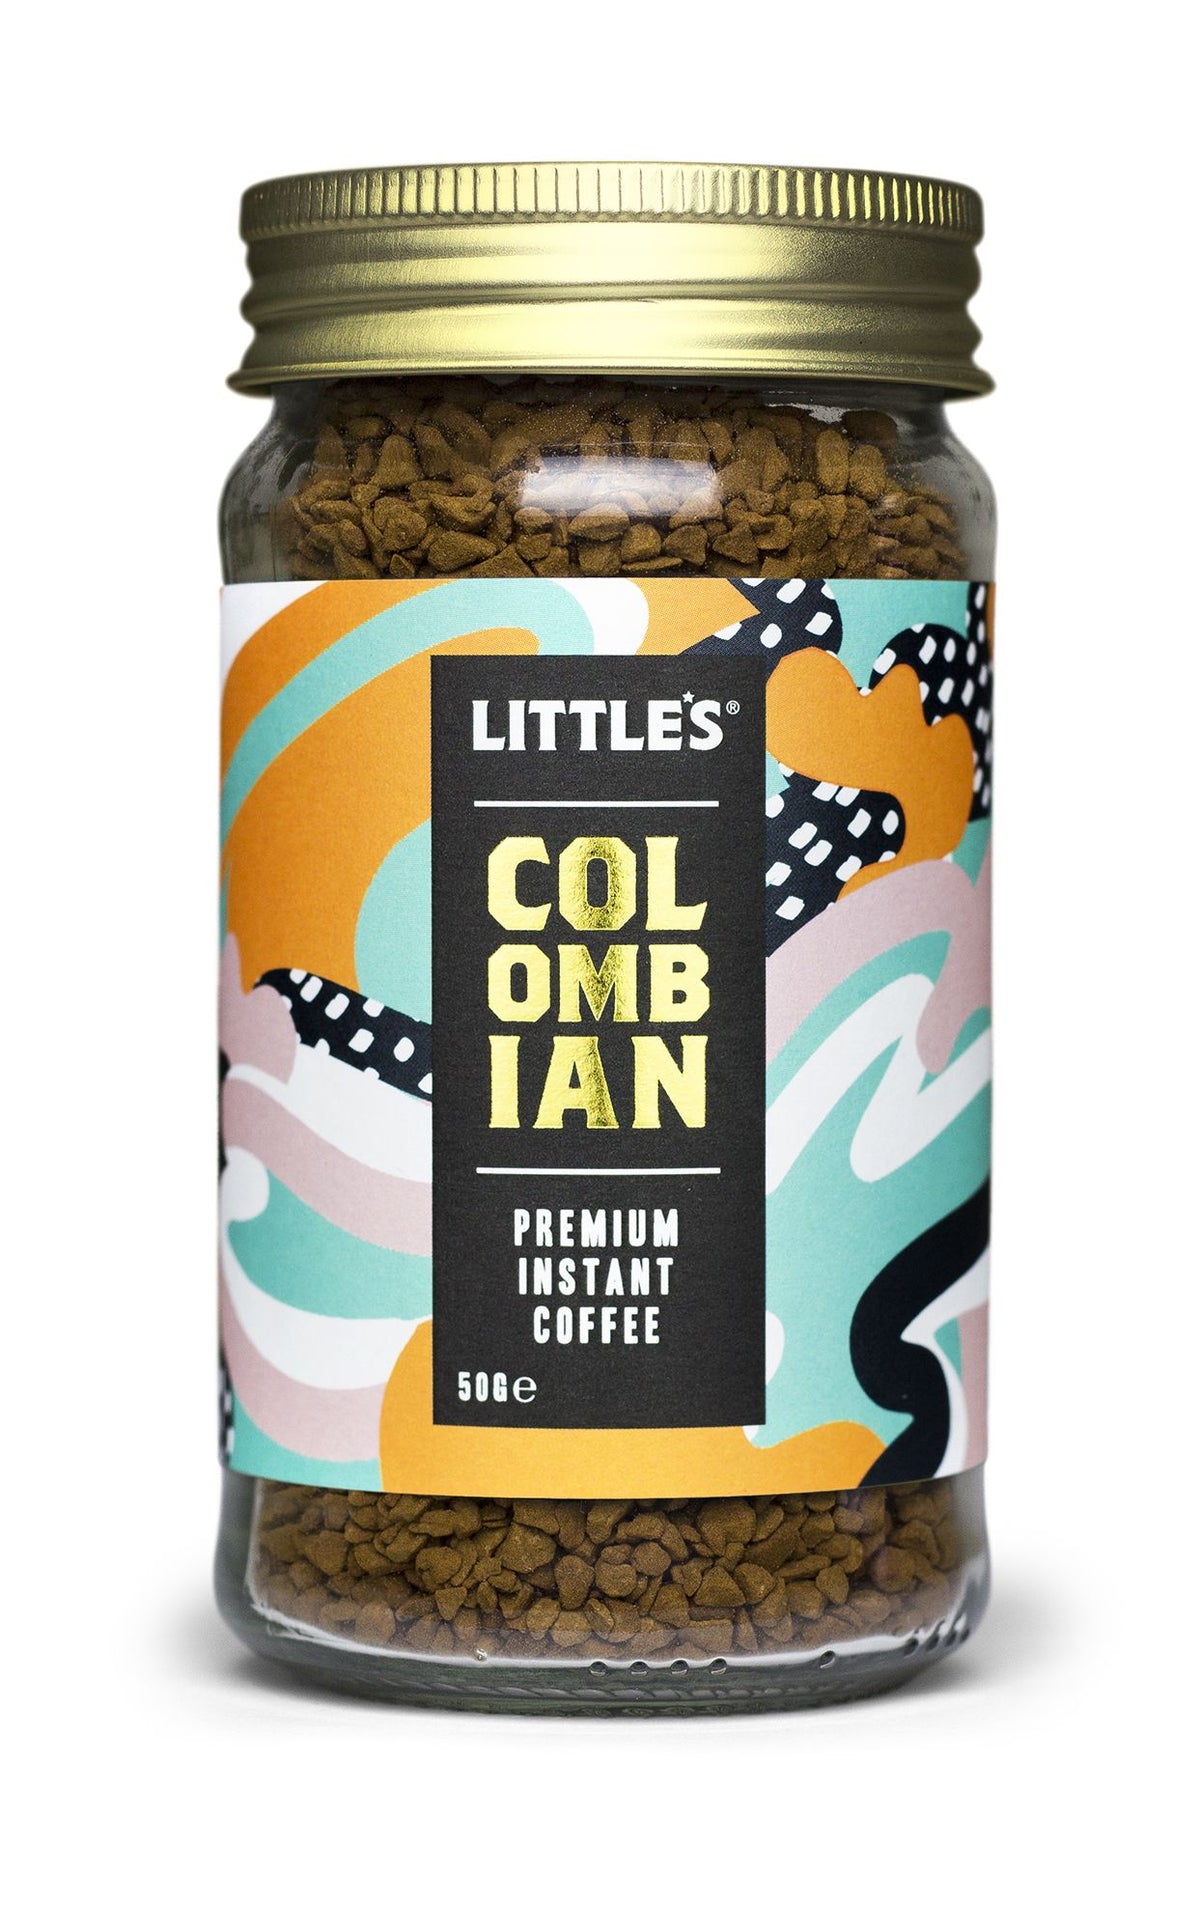 Option for instant coffee by Littles 